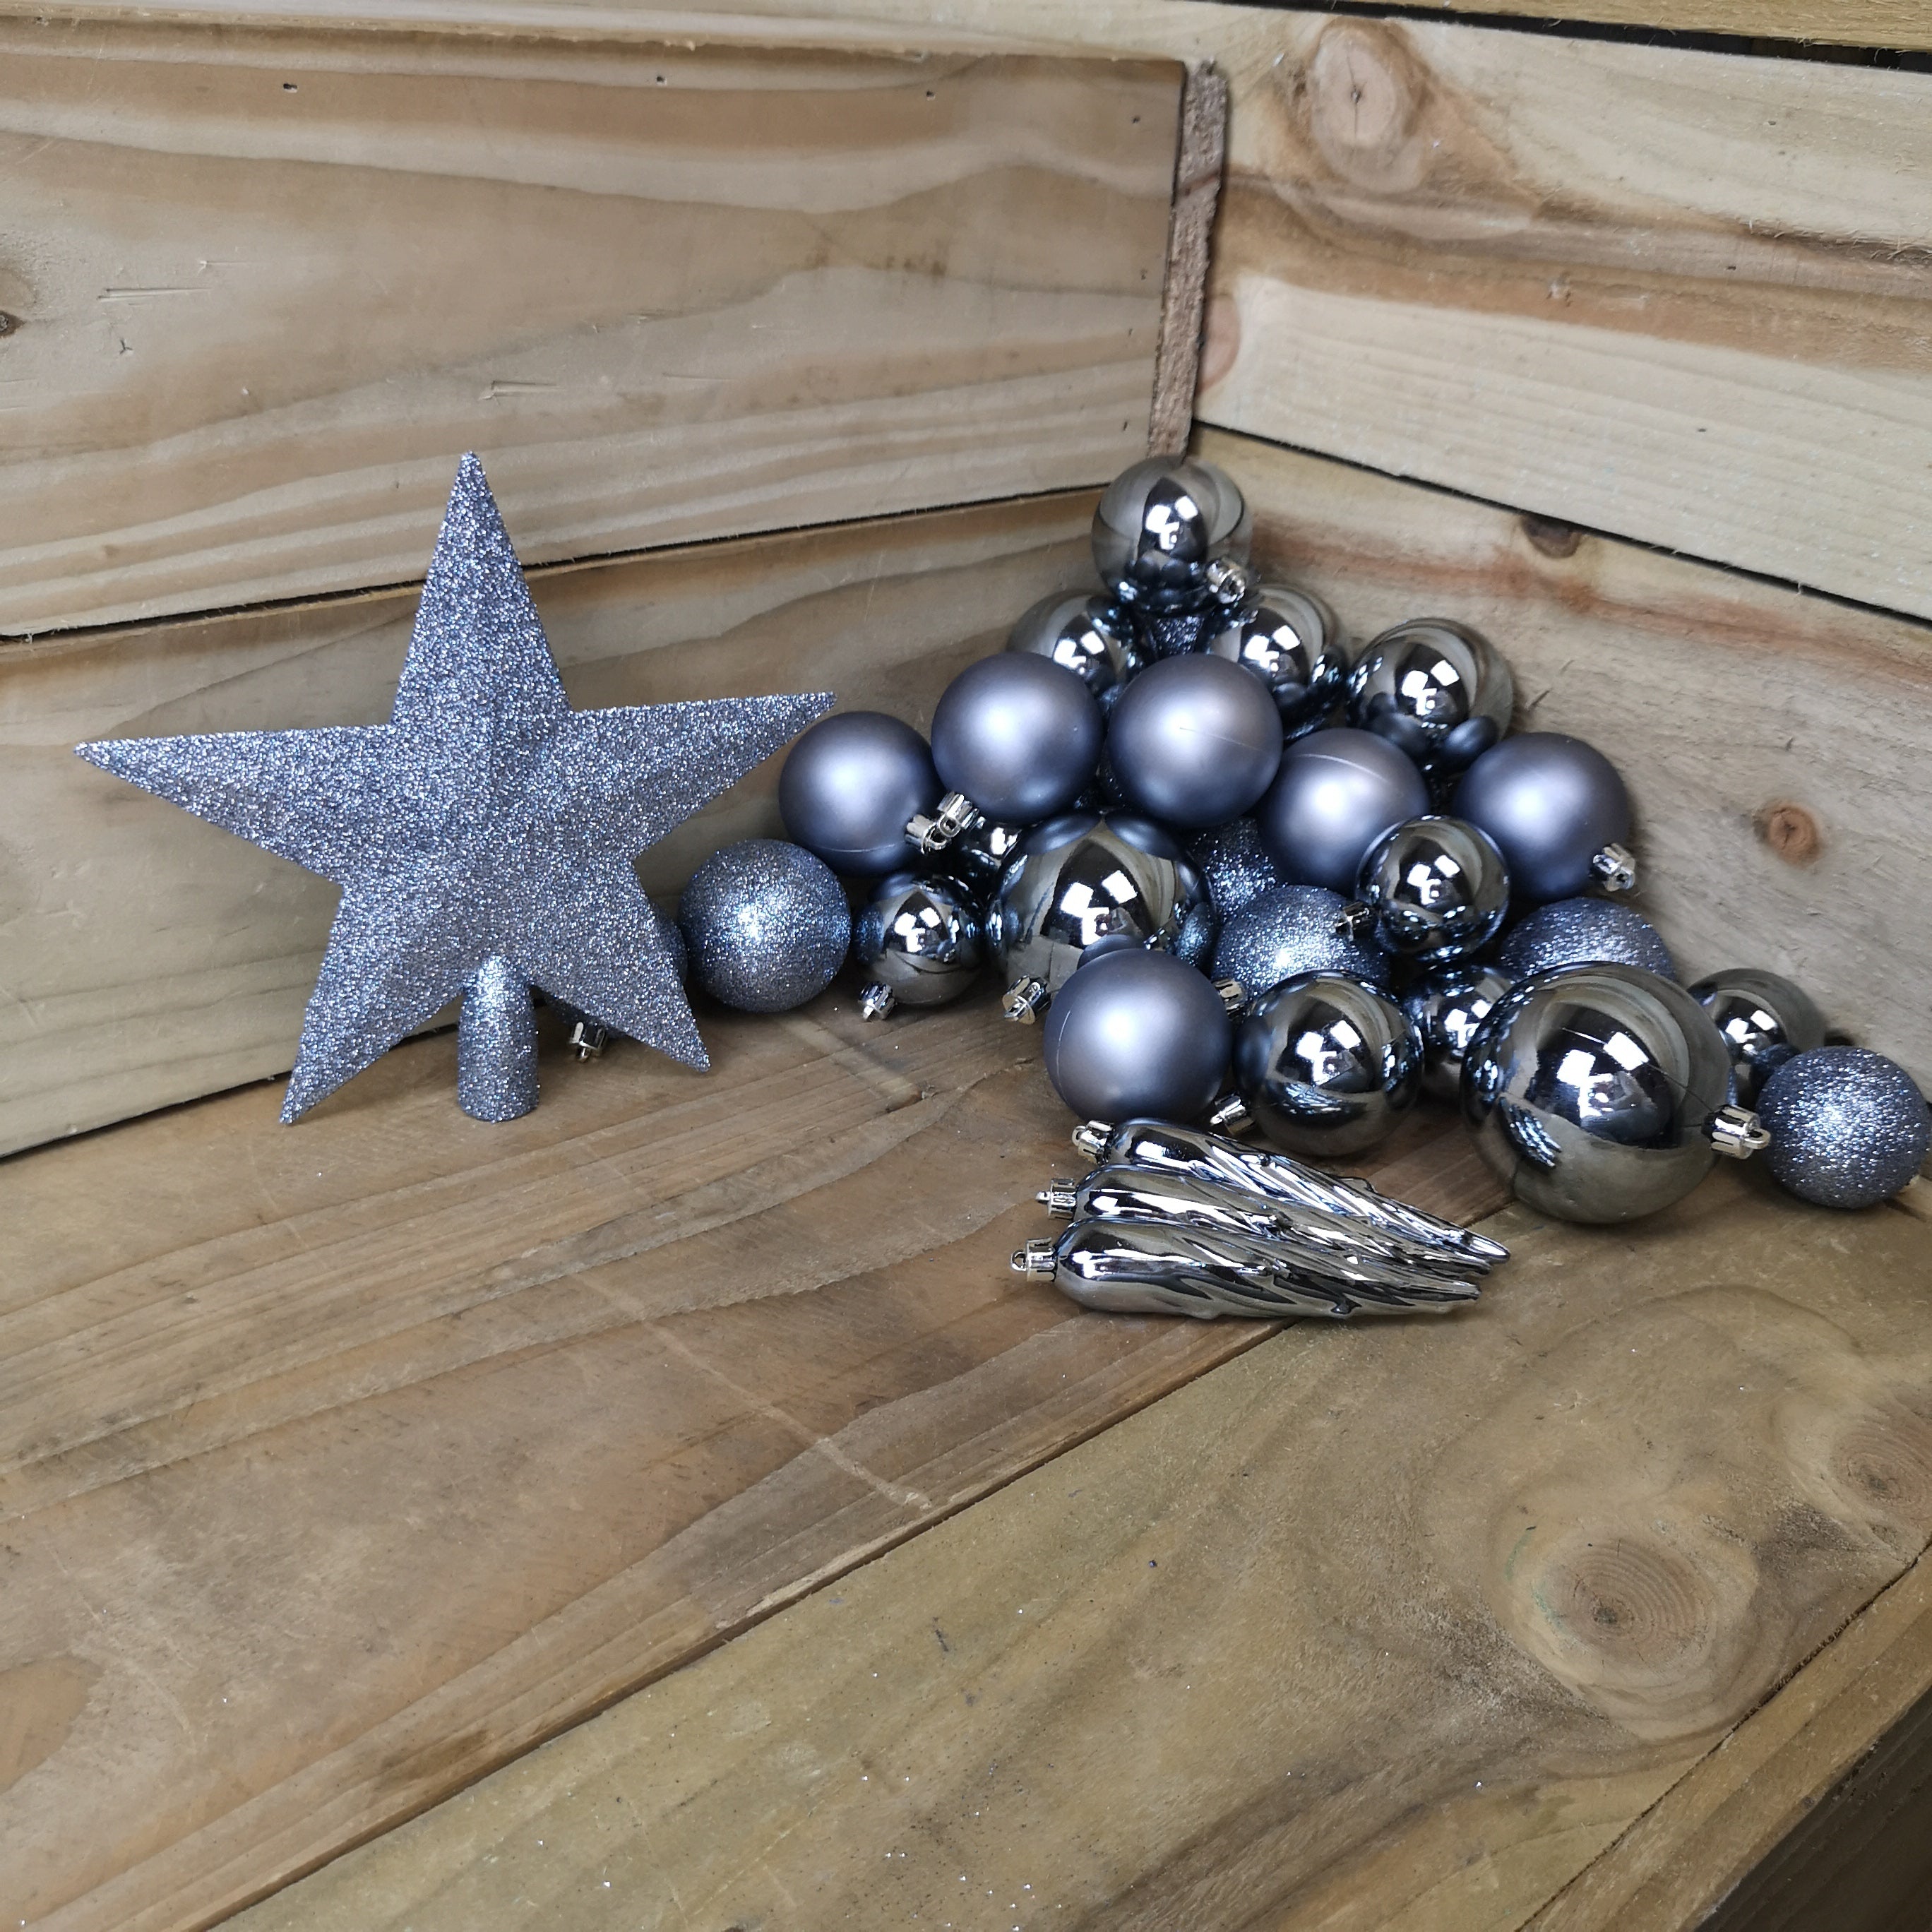 33 Assorted Shatterproof Christmas Baubles With Star Tree Topper - Blue Stone